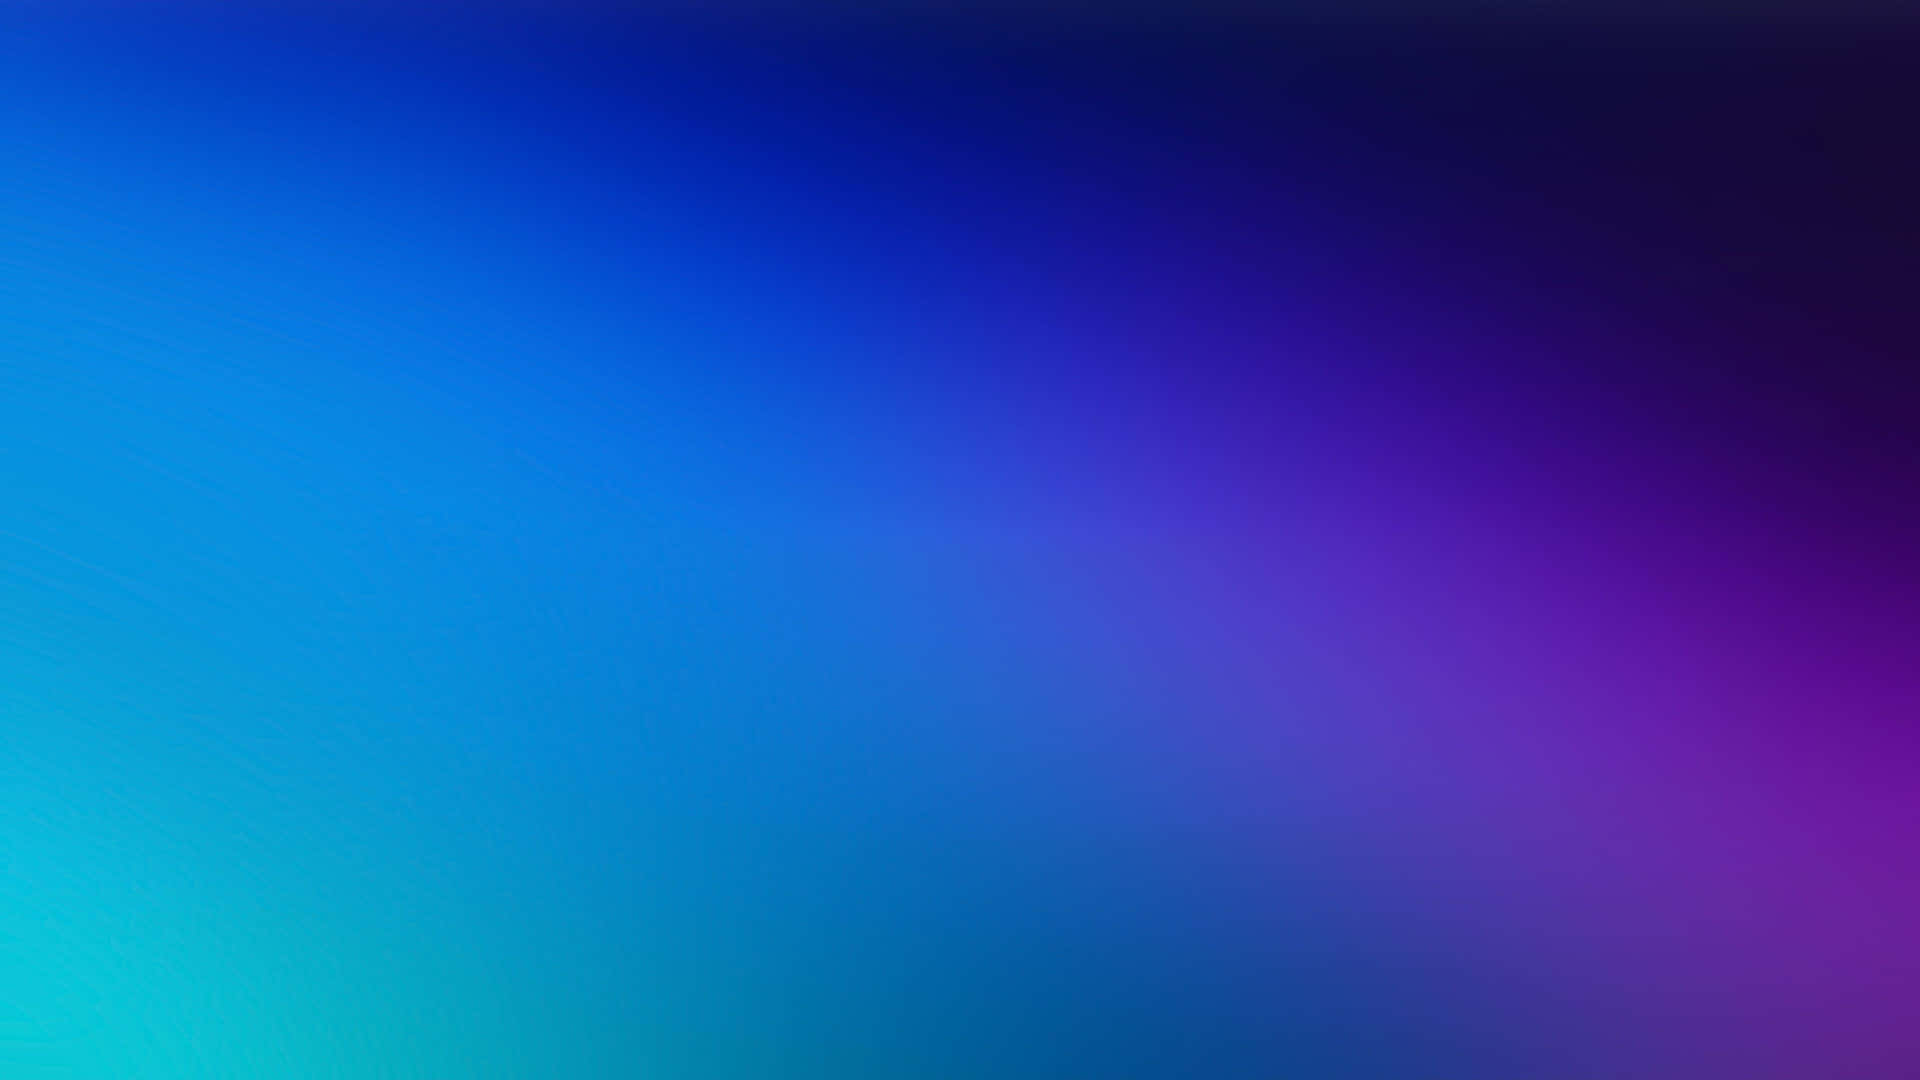 A Vibrant Wallpaper Showing Varying Shades Of Blue and Purple